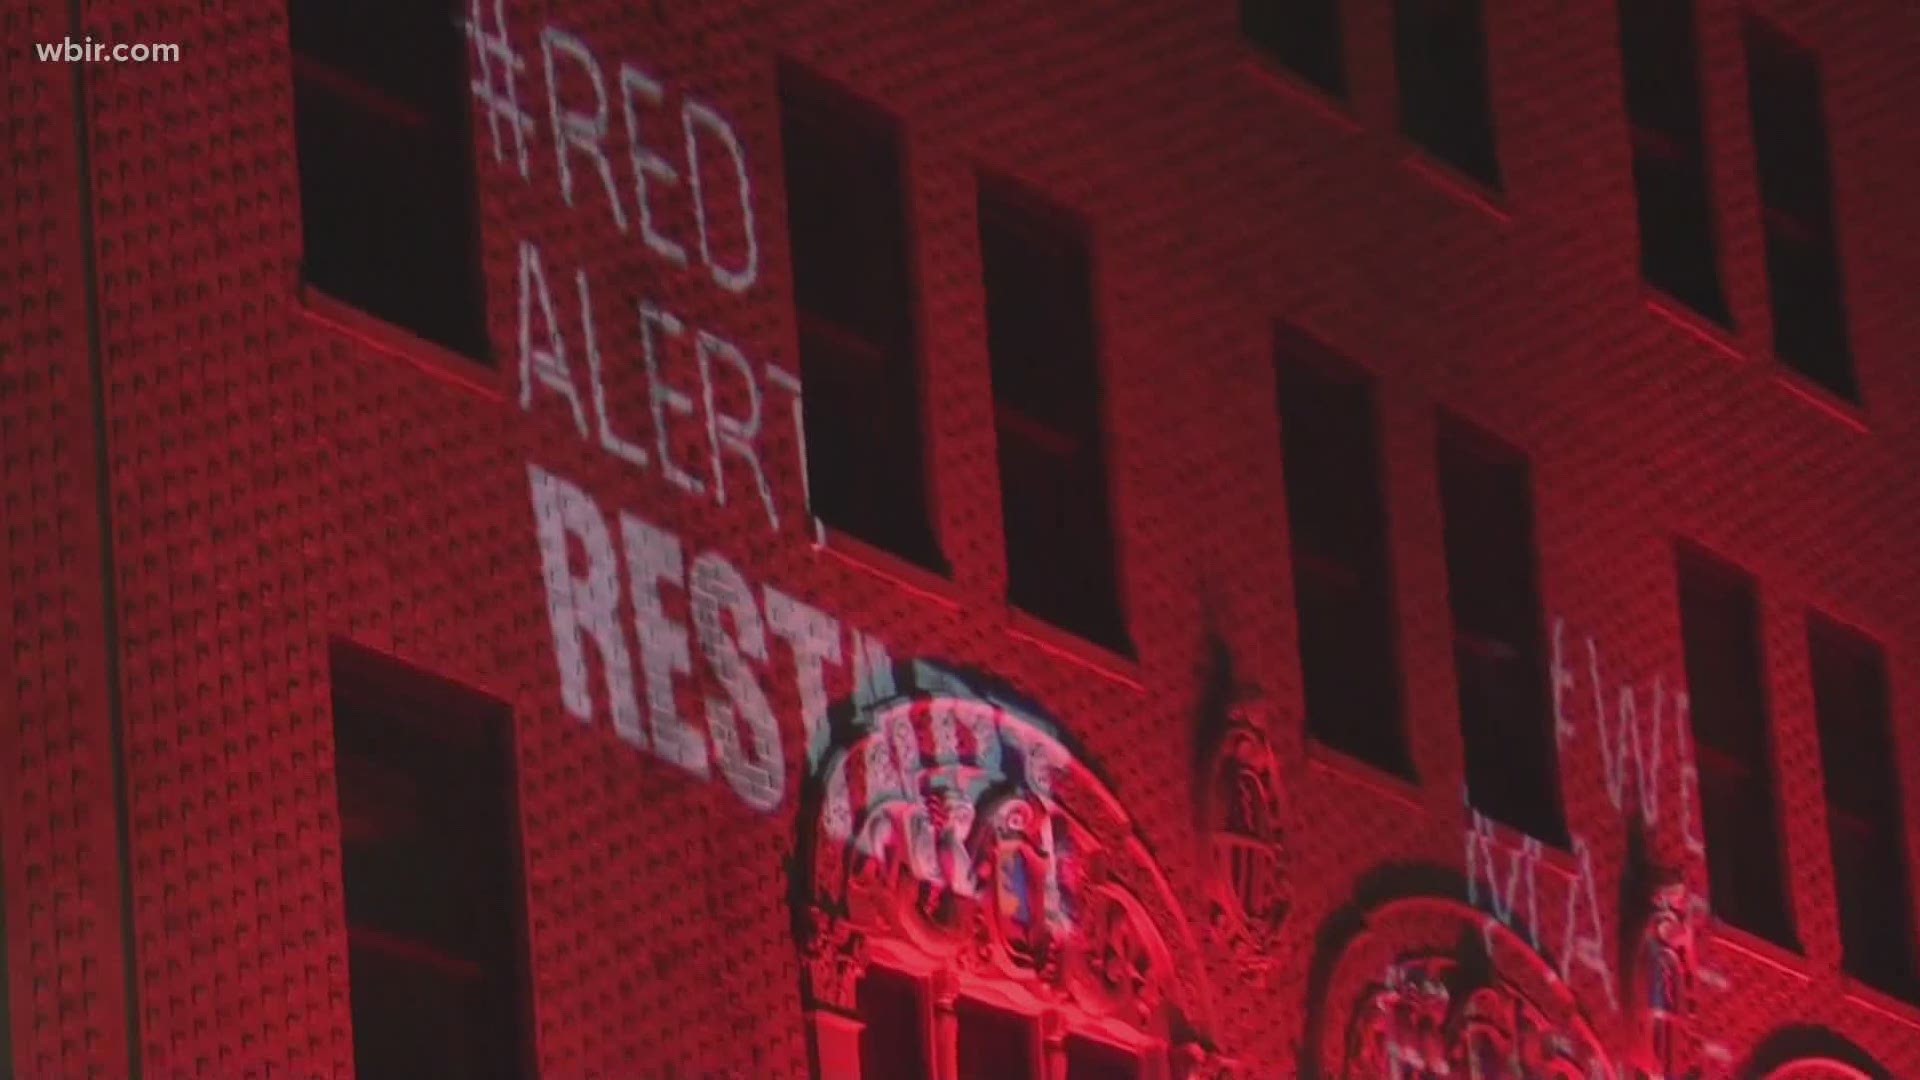 A man started the #RedAlertRESTART movement, to urge lawmakers to pass an act that would expand relief funding for the entertainment industry.